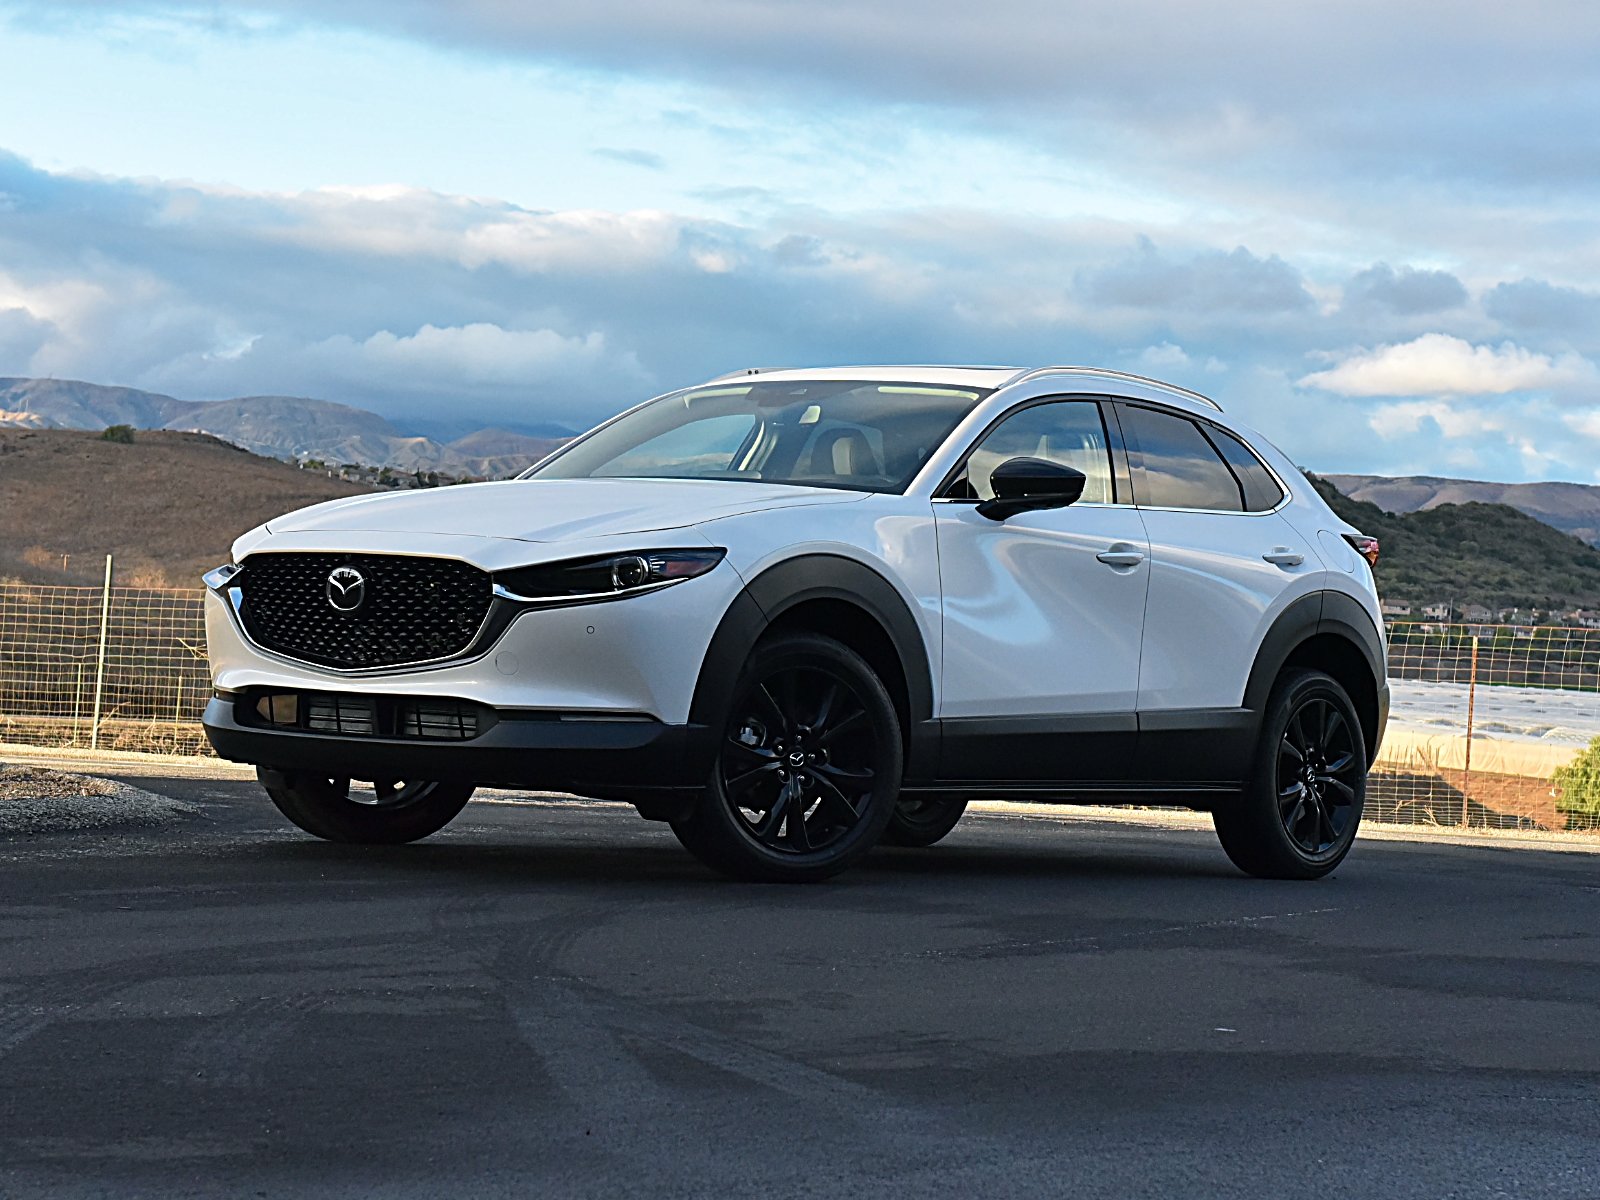 2021 Mazda CX-30 Turbo: For The Sport Compact Car Reader Who Has